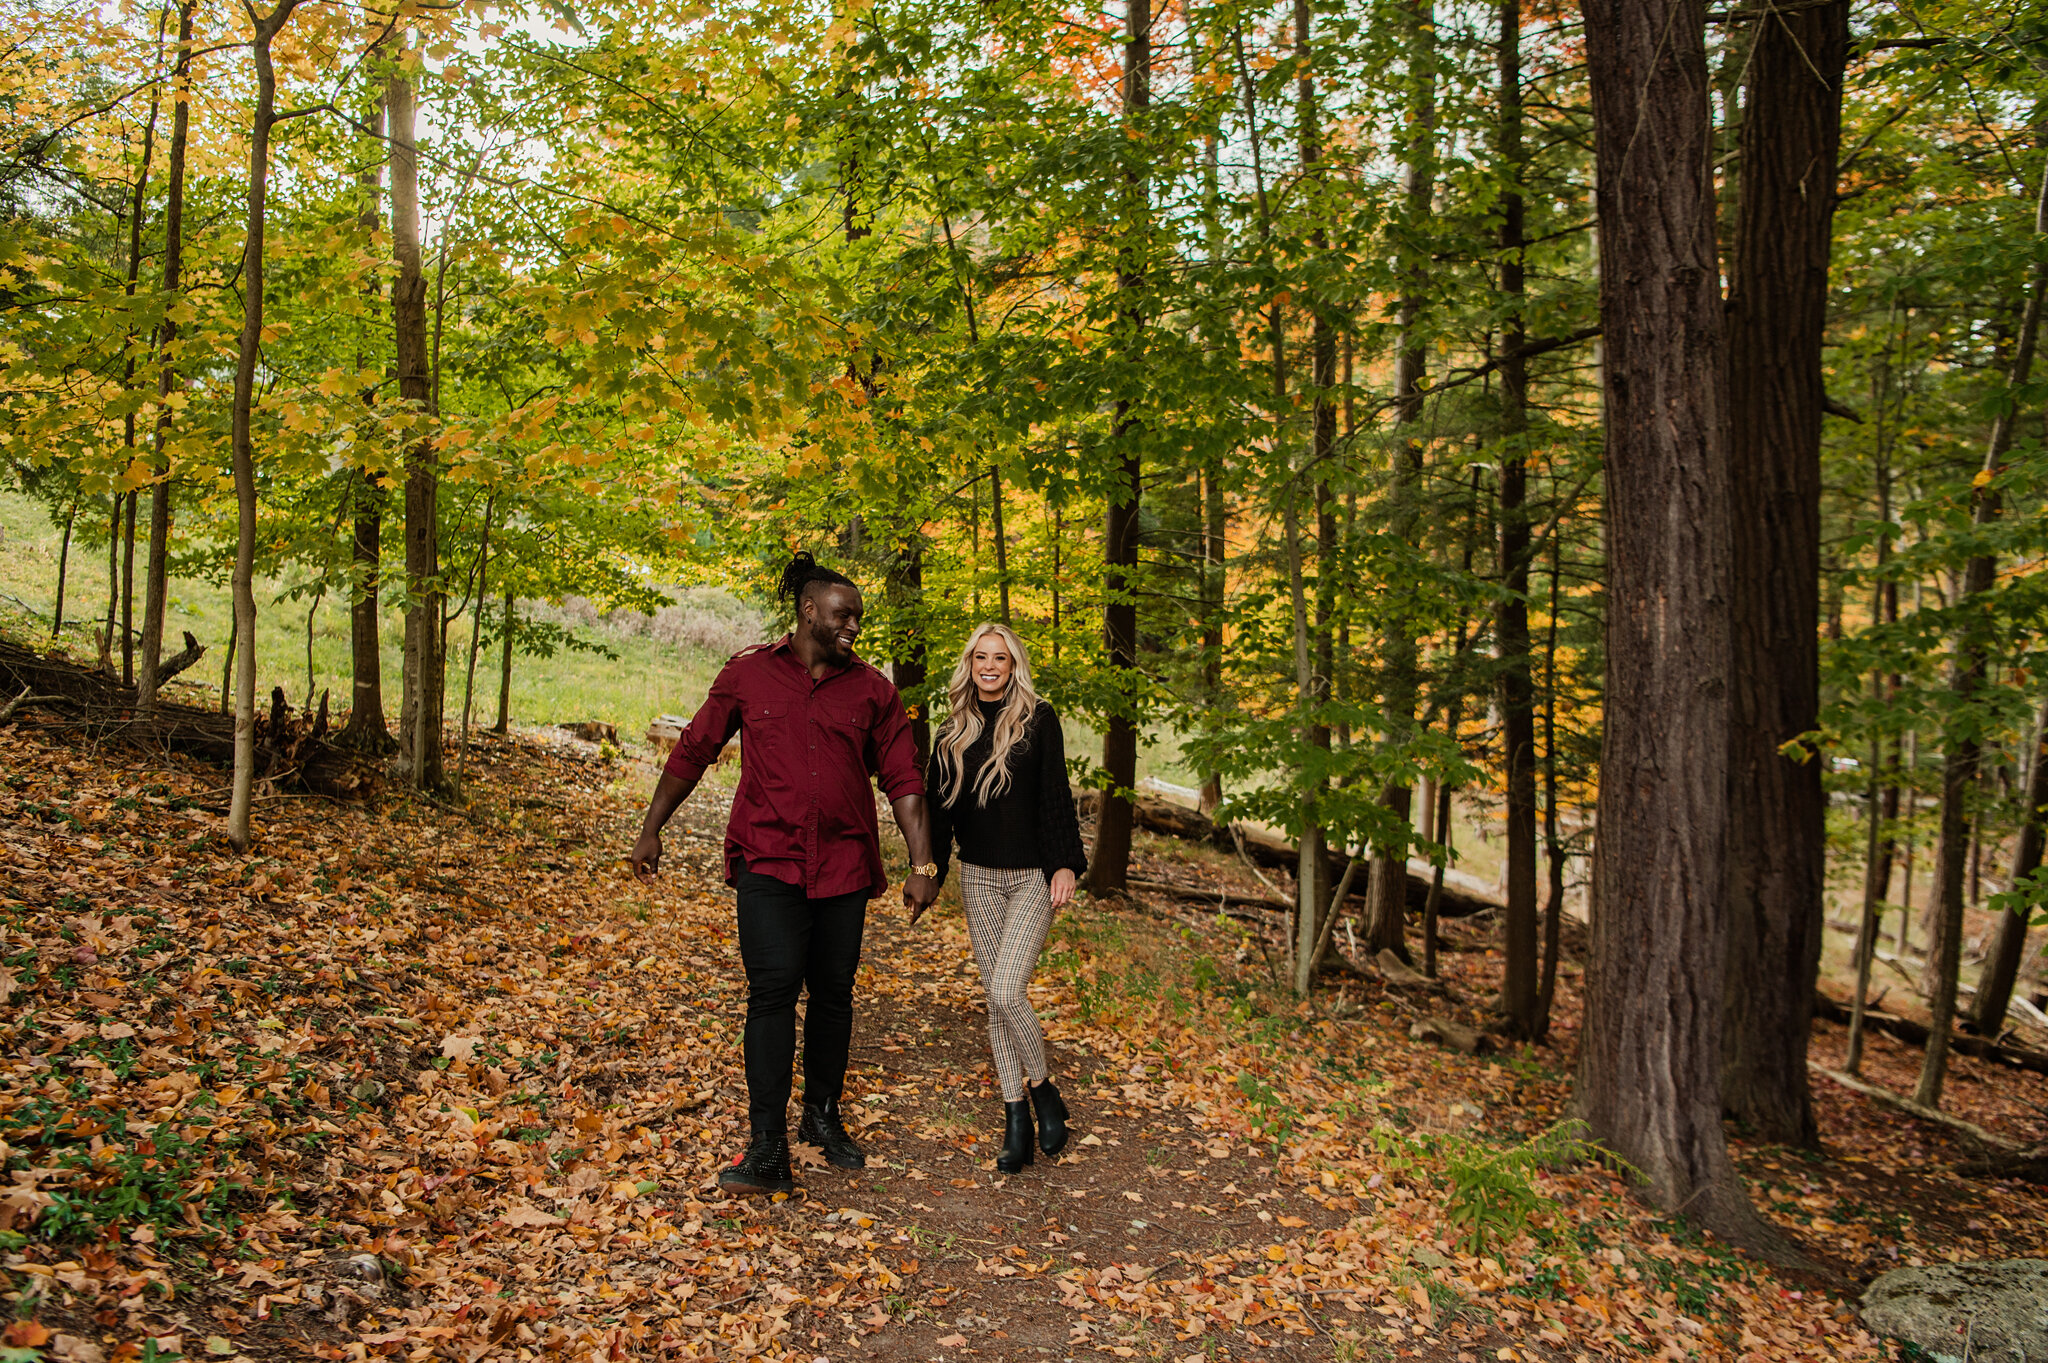 Letchworth_State_Park_Rochester_Couples_Session_JILL_STUDIO_Rochester_NY_Photographer_9359.jpg